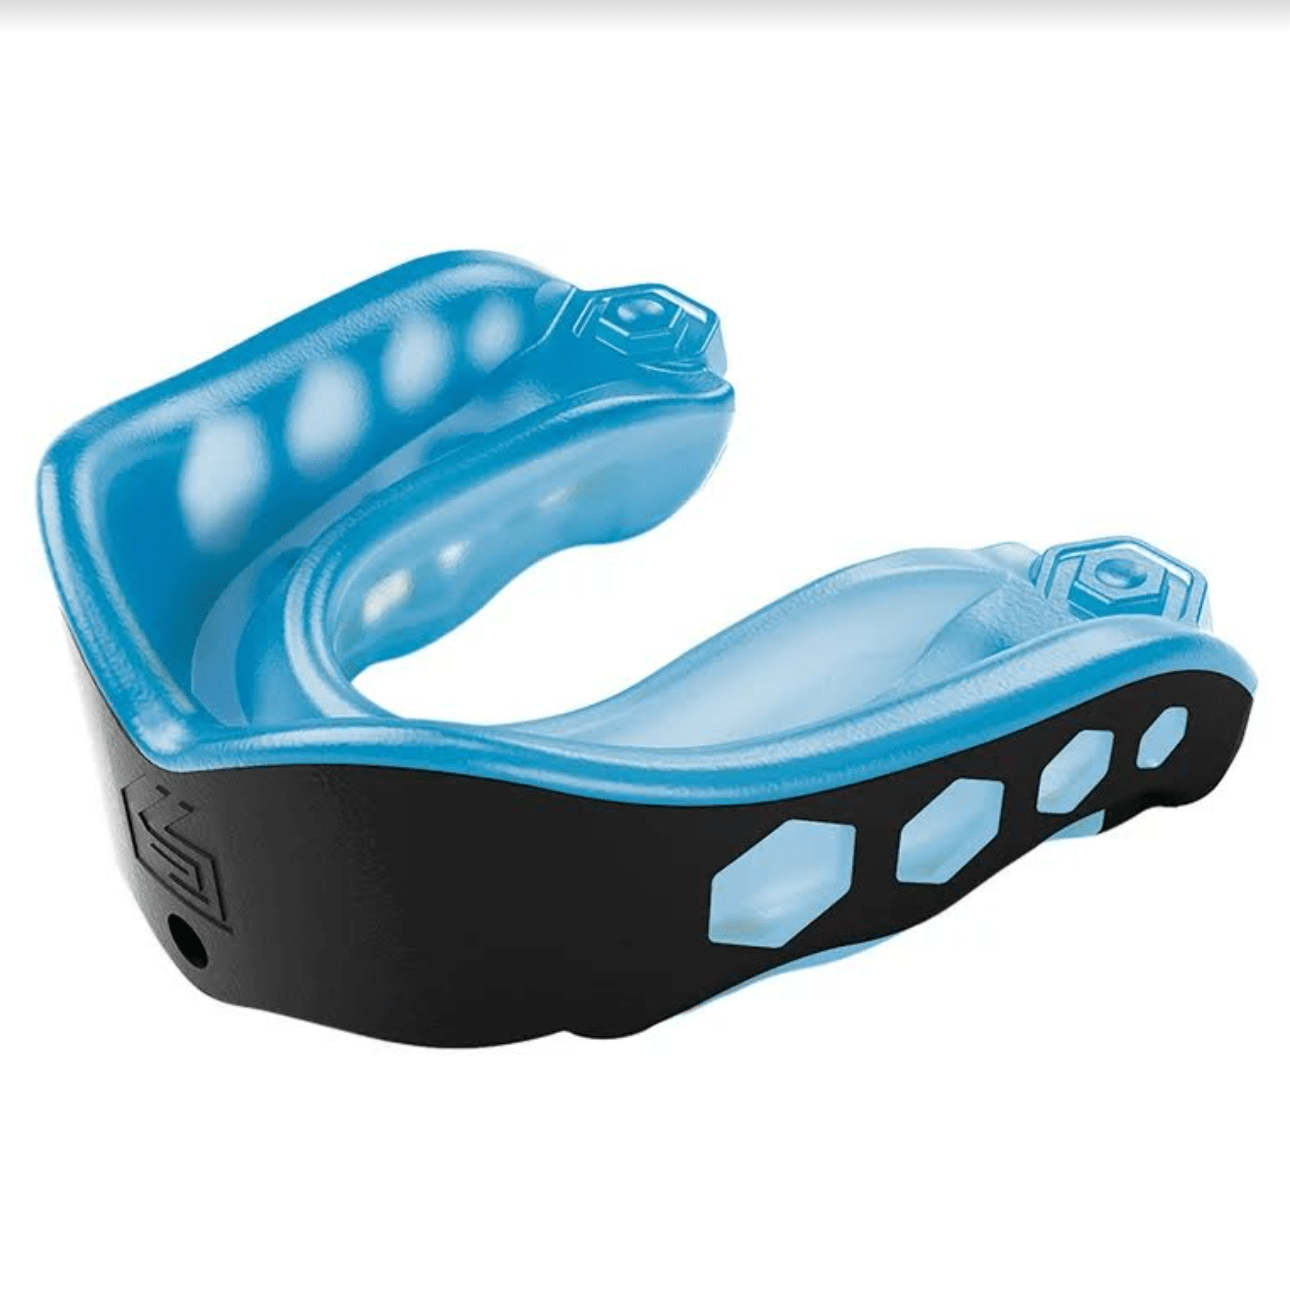 Should my child wear a mouthguard?